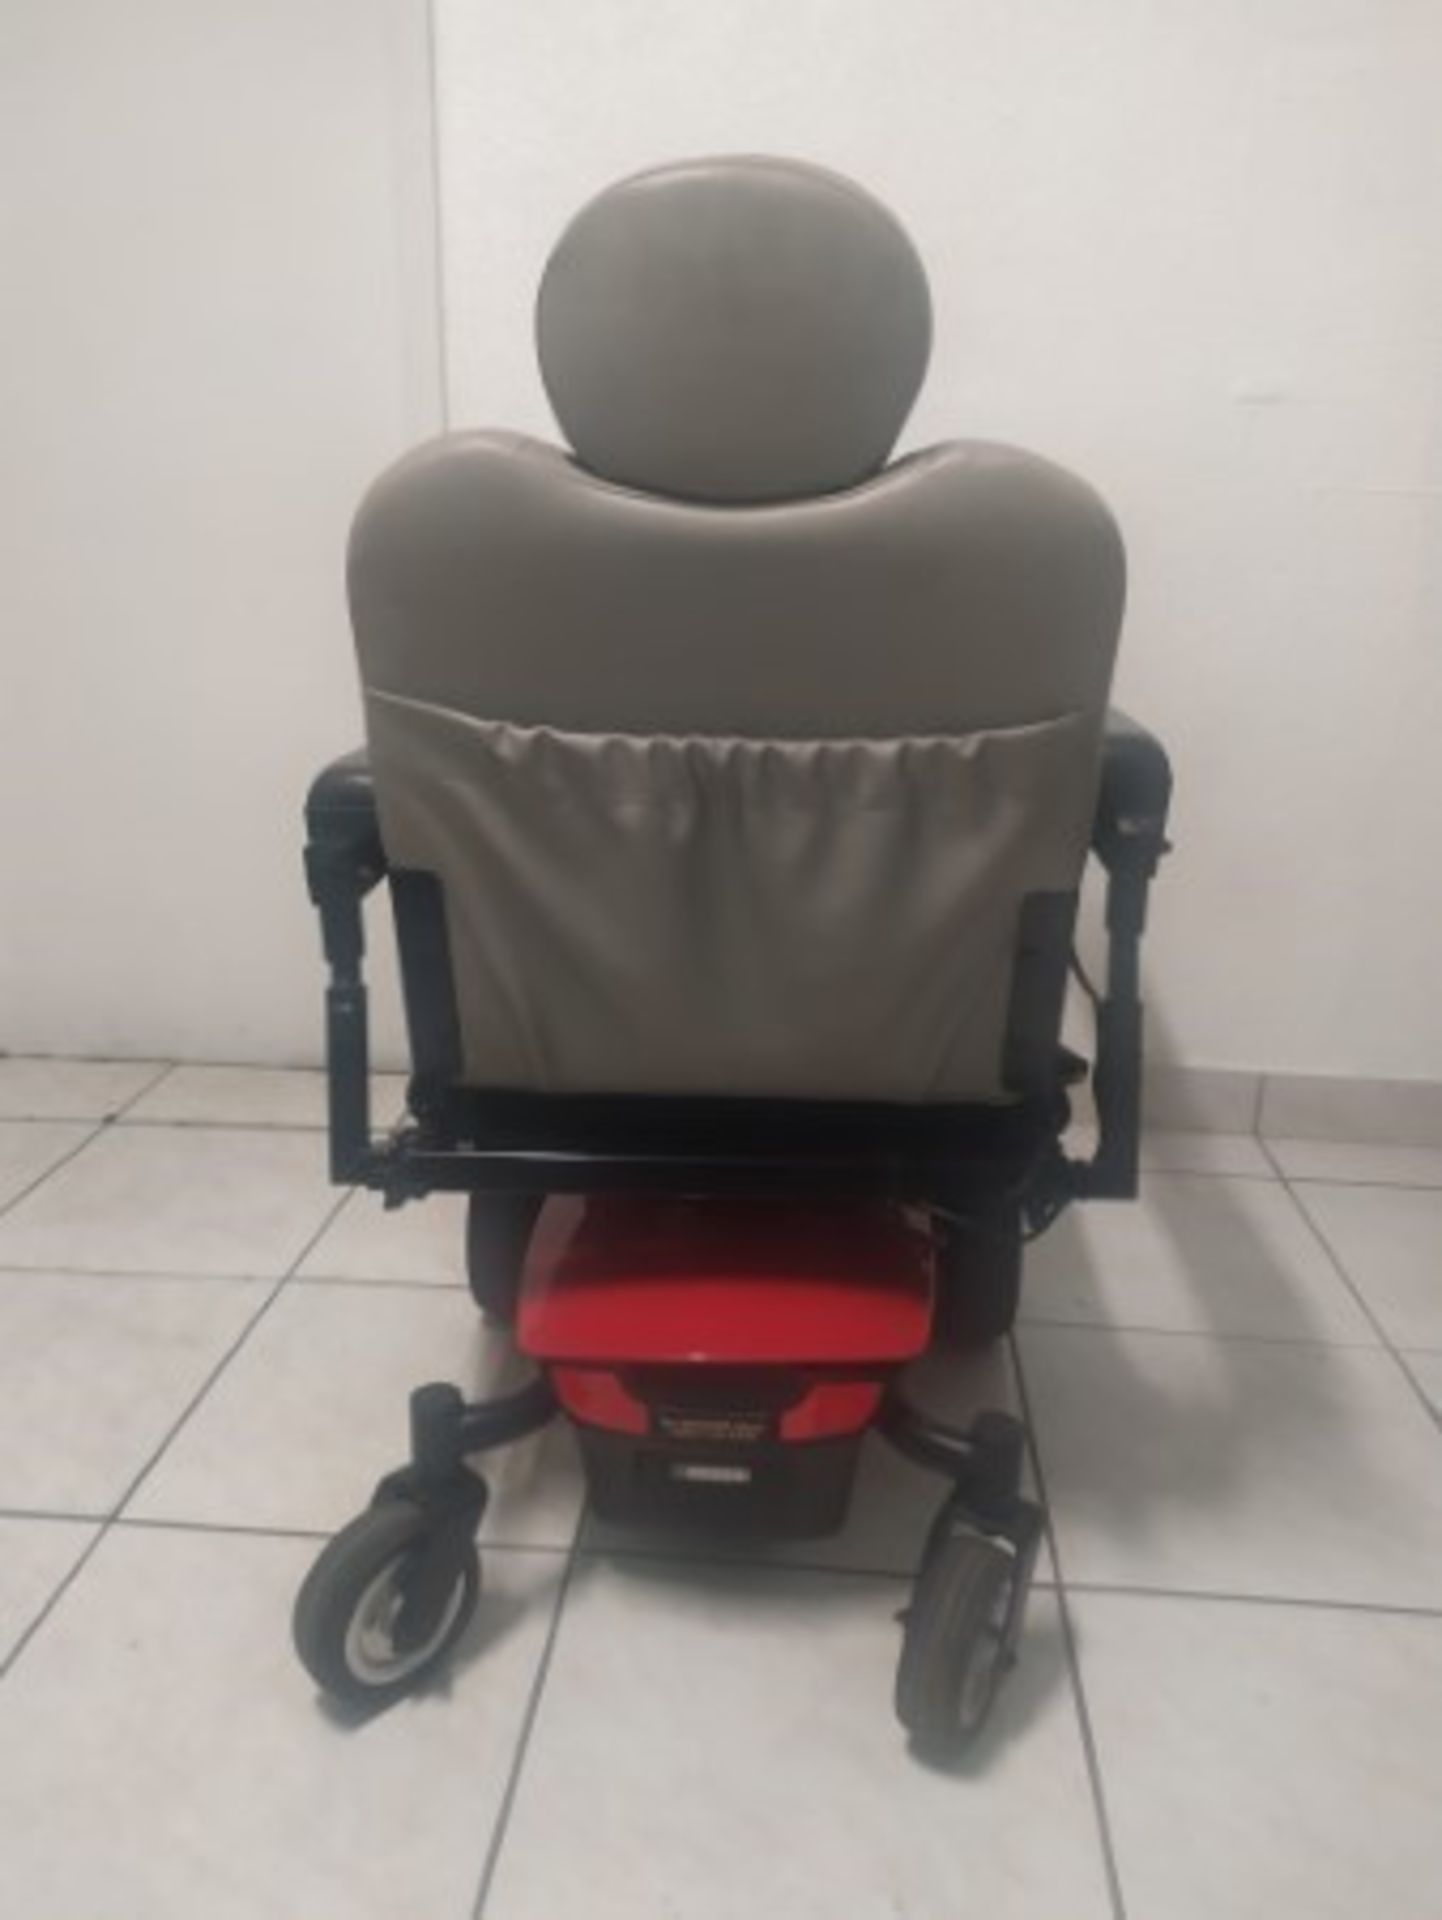 2015 PRIDE TSS300 6-WHEEL POWER CHAIR WITH JOYSTICK CONTROL - RED - 300LB CAPACITY - SERIAL No. JB10 - Image 4 of 4